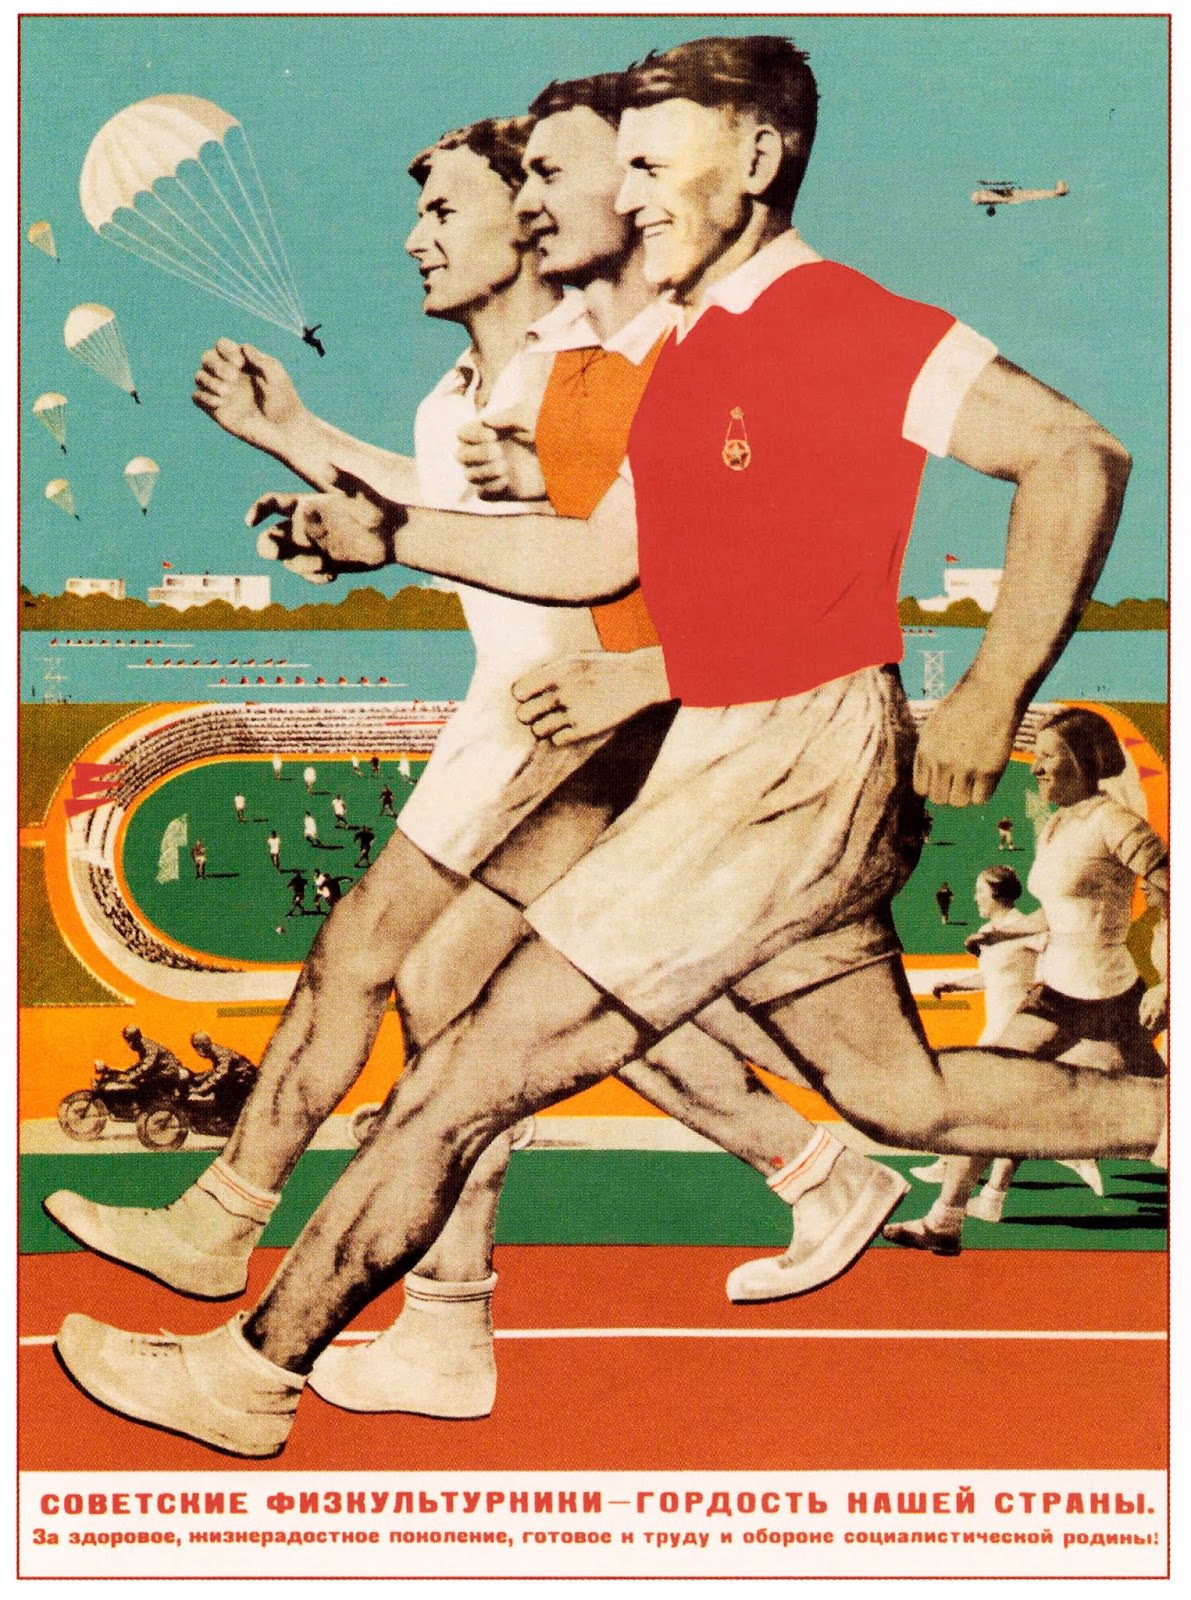 Soviet athletes are the pride of our country!